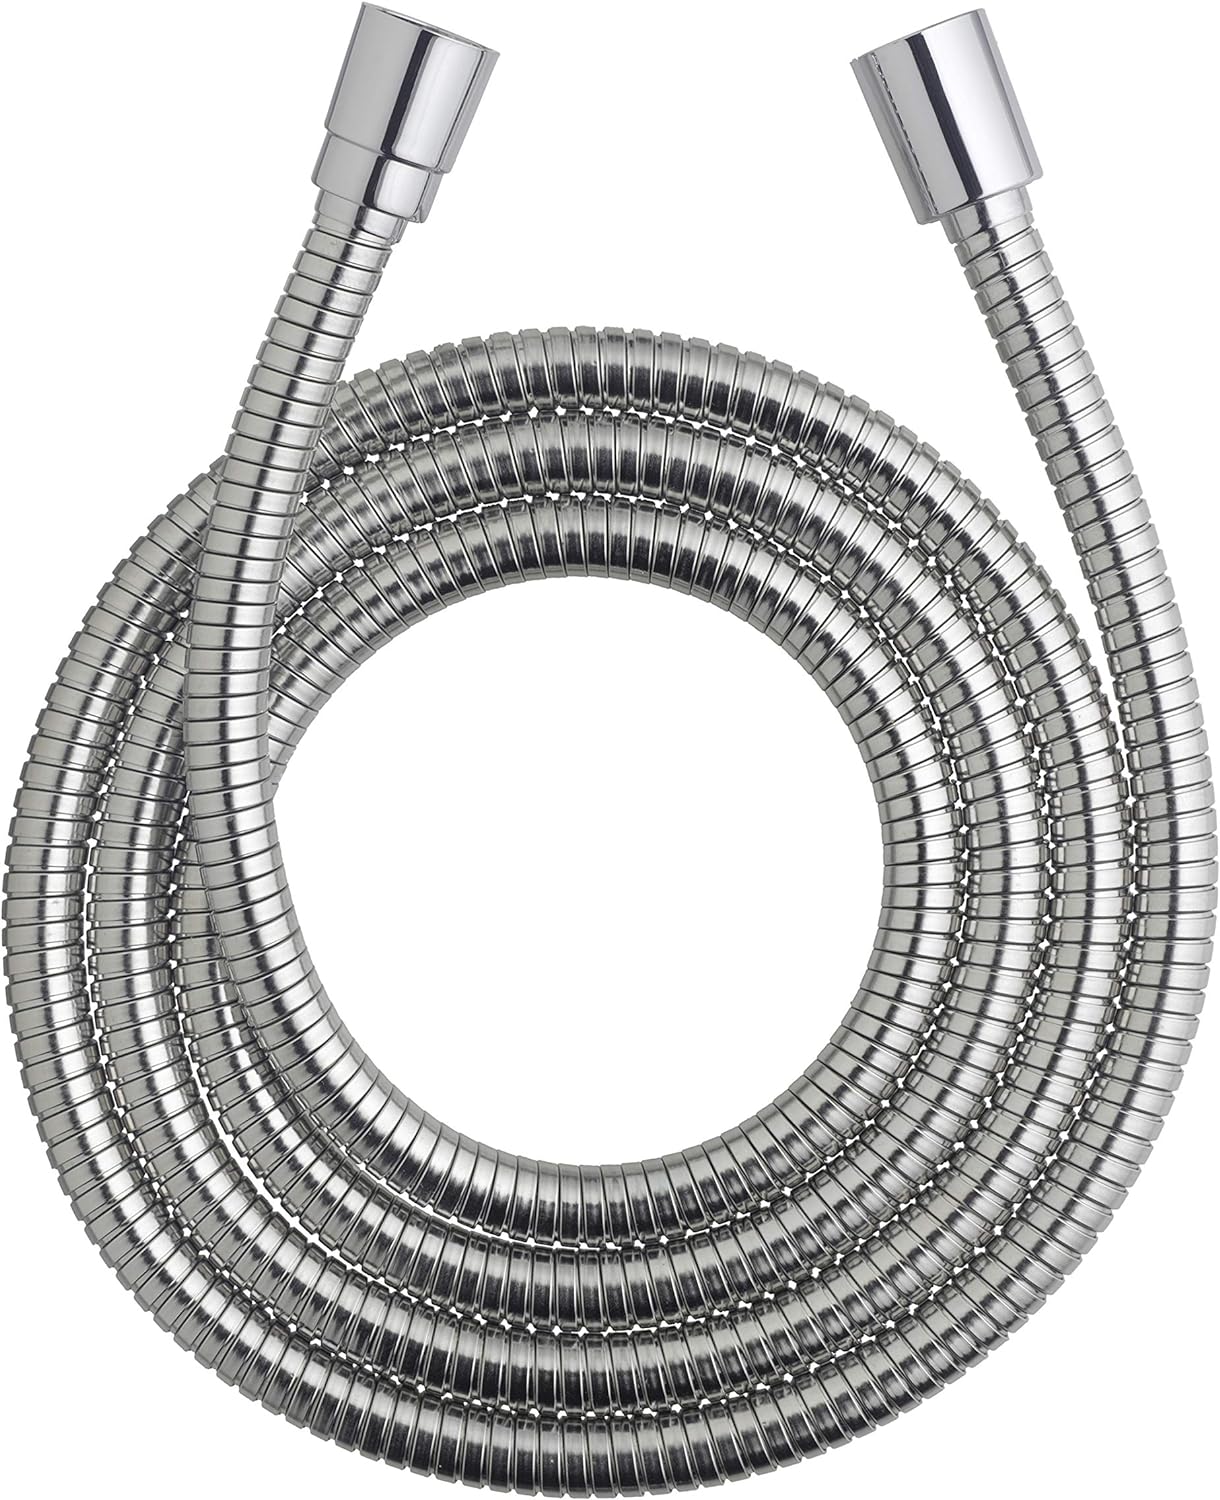 Waterpik HOS-960M Ultra-Flexible Replacement Metal Shower Hose, Extra Long for Handheld Shower Heads, 96-inch, Chrome